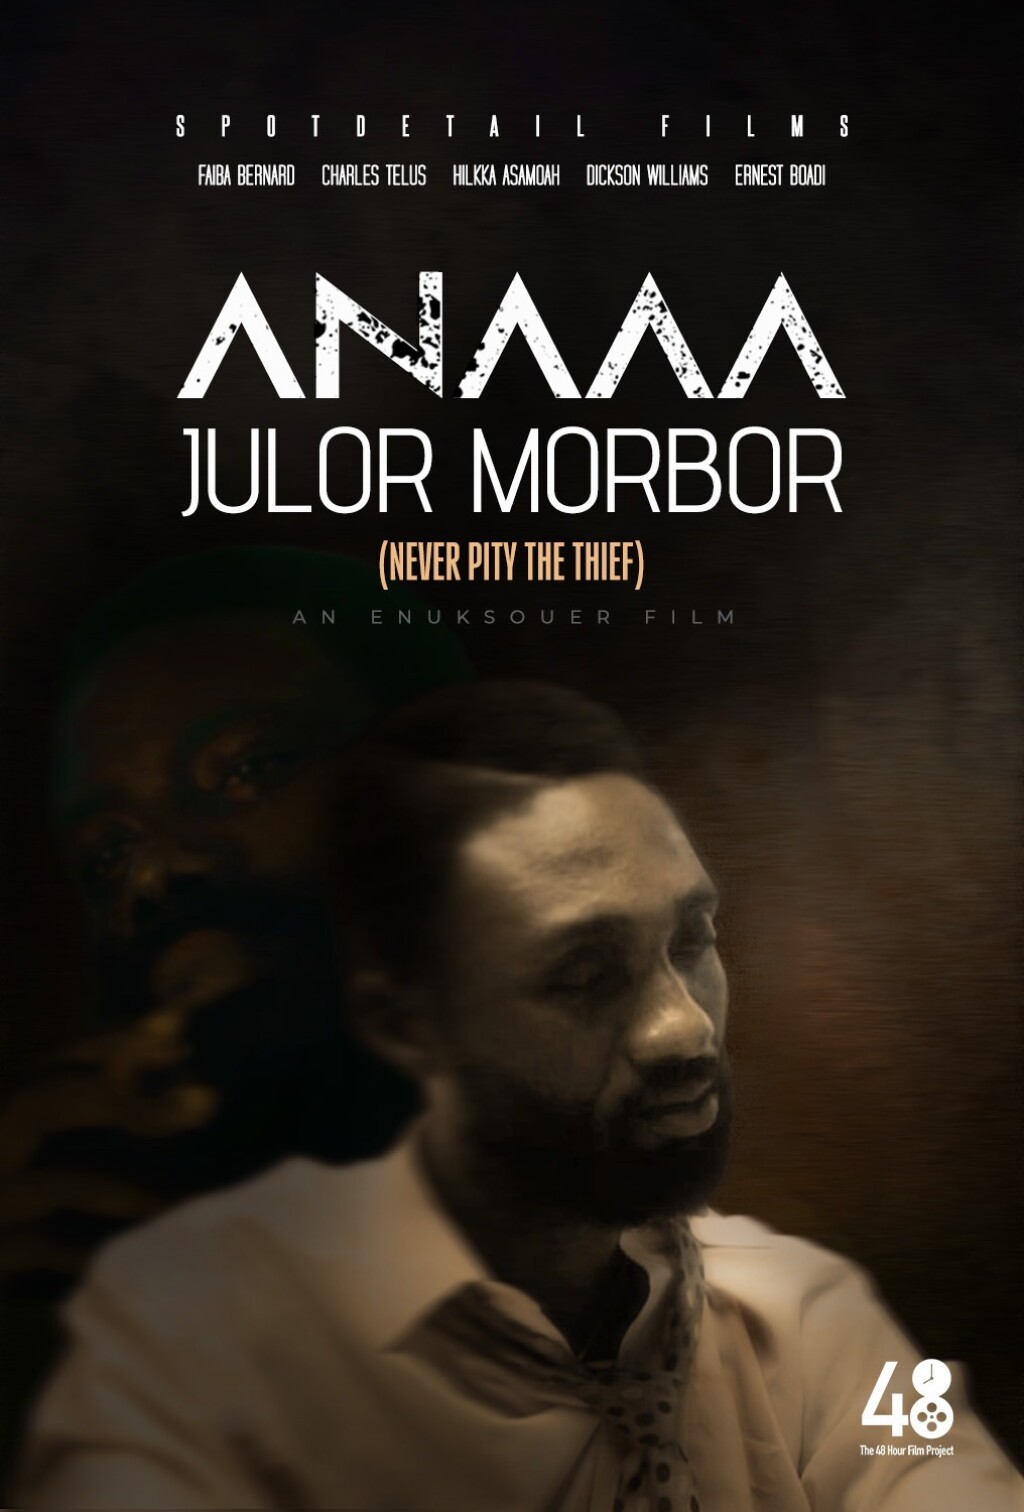 Filmposter for Anaaa Julor Morbor